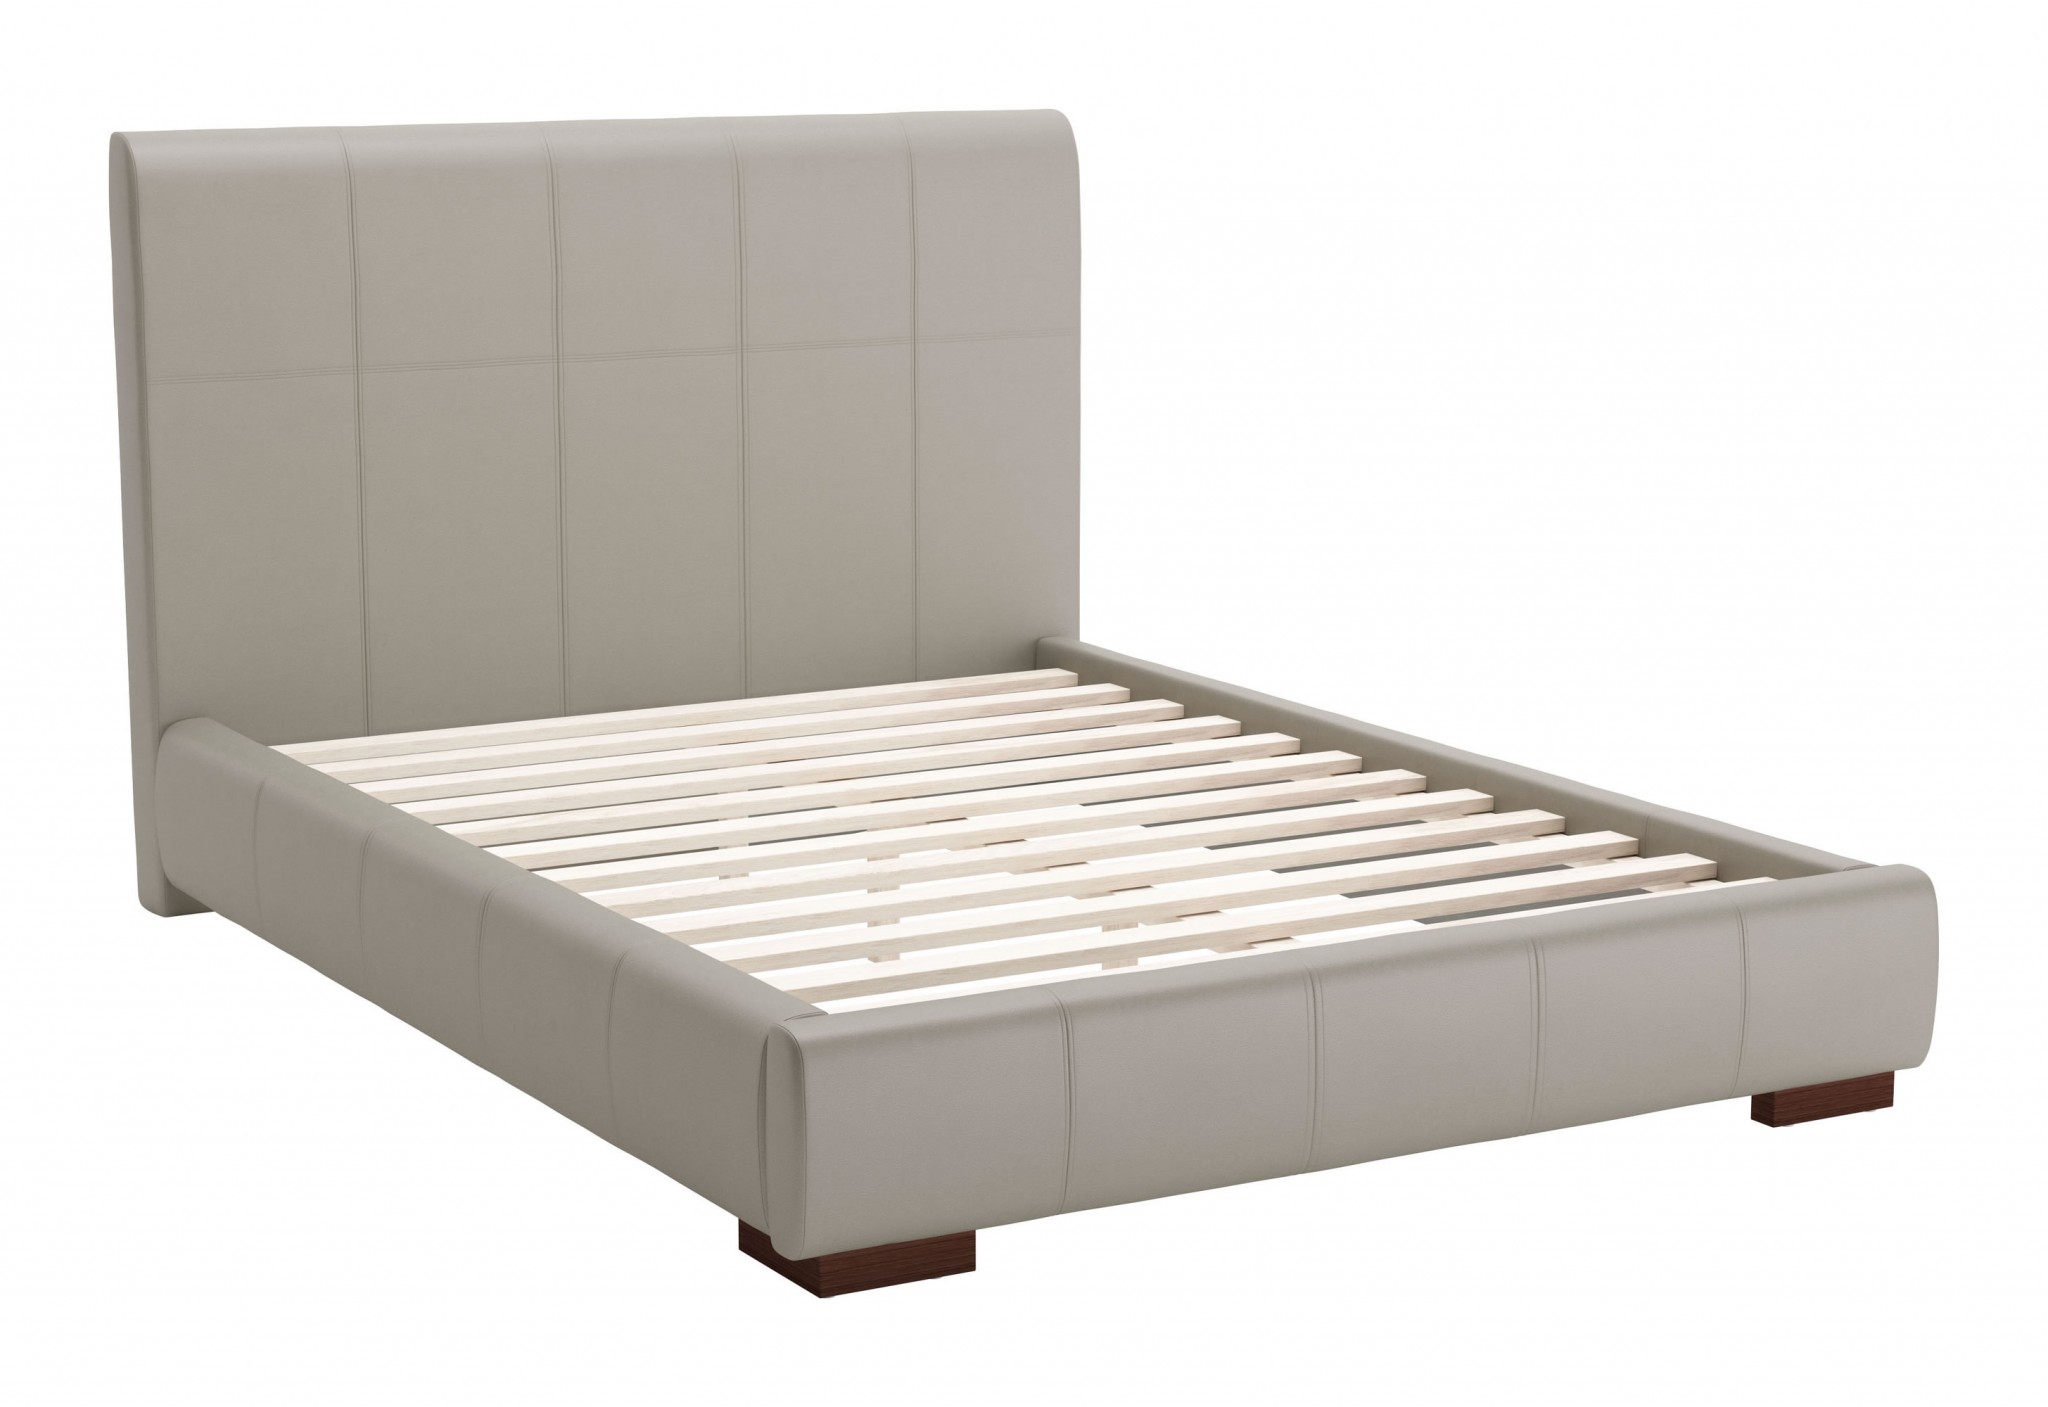 62.2" x 83.9" x 43.5" Gray, Leatherette, Plywood, MDF, Full Bed